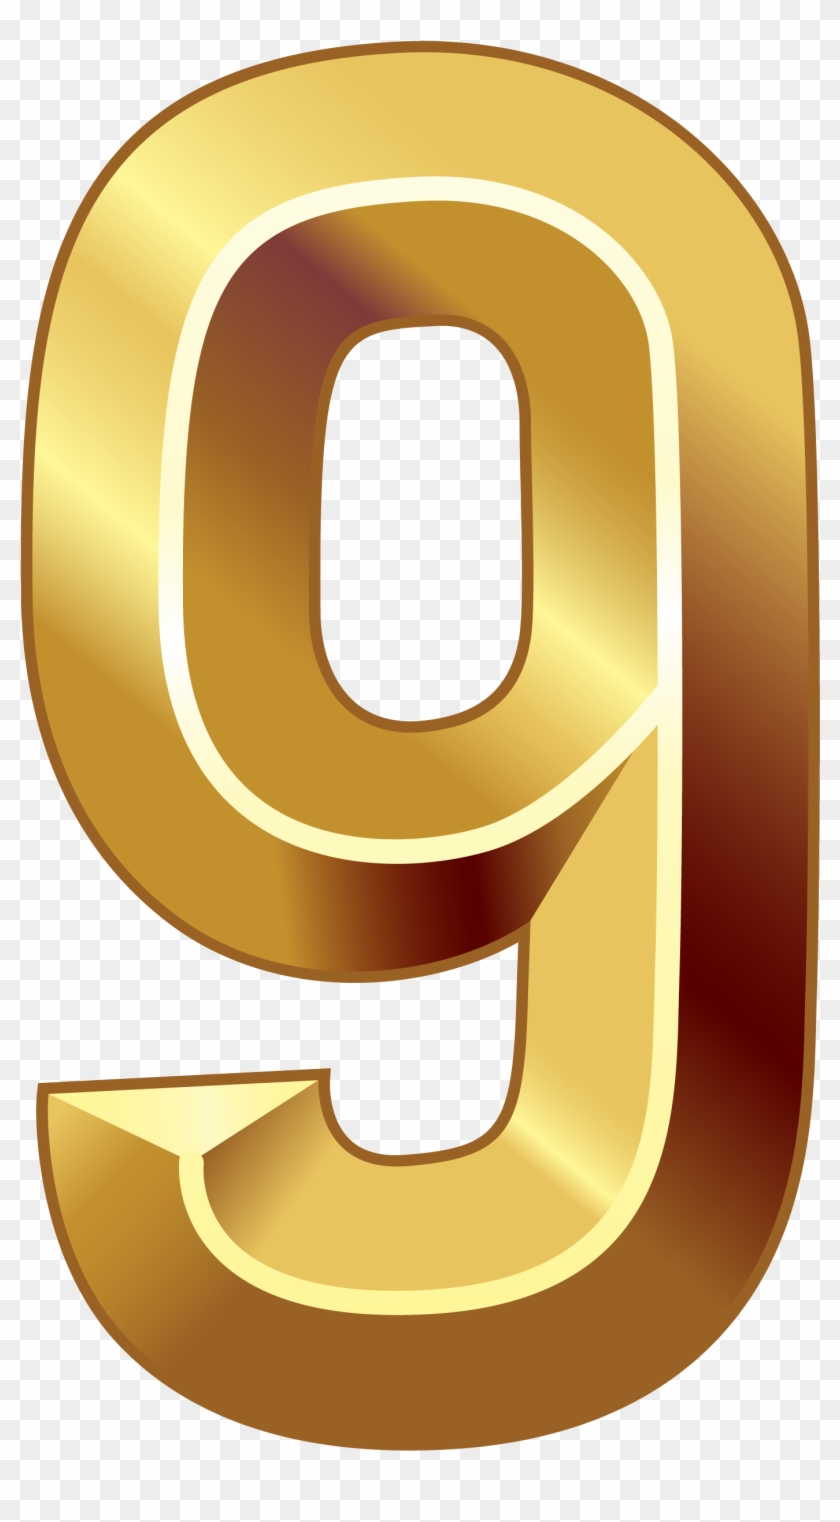 Gold Nine Png Image Gallery Yopriceville High Ⓒ - Golden Number 0 Png Clipart